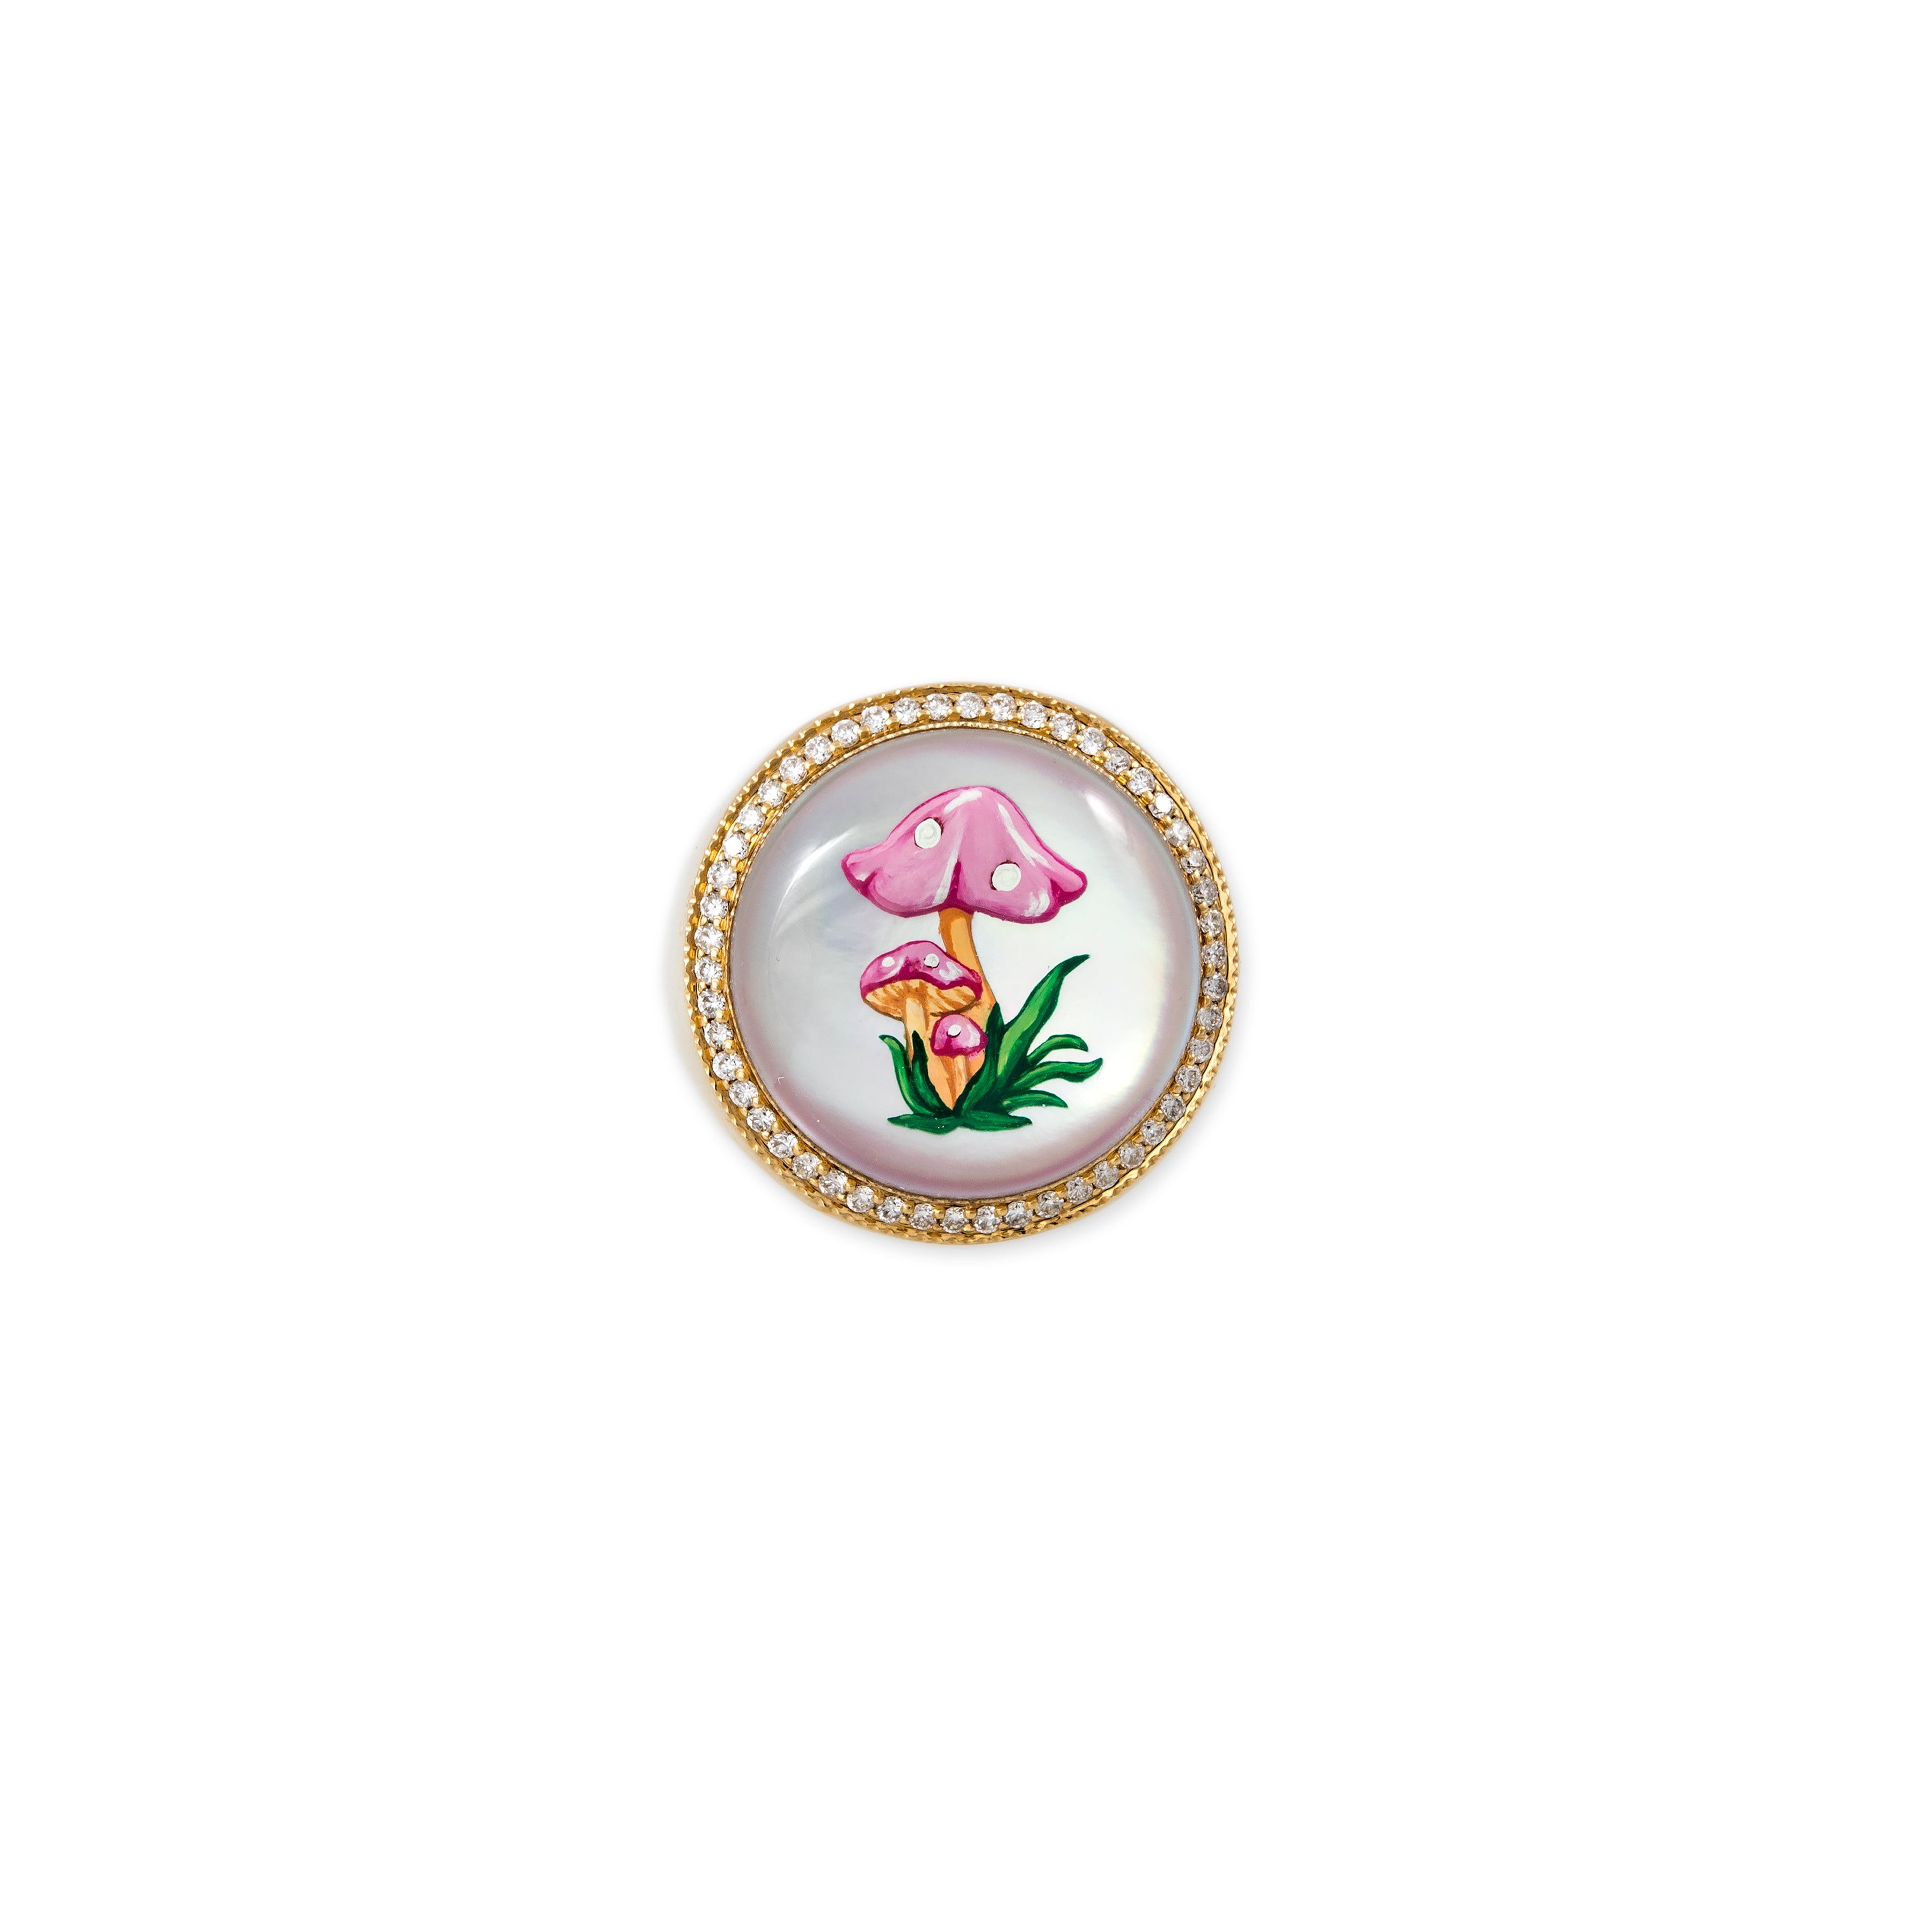 PAVE HAND PAINTED PINK MUSHROOM ON MOTHER OF PEARL SIGNET RING